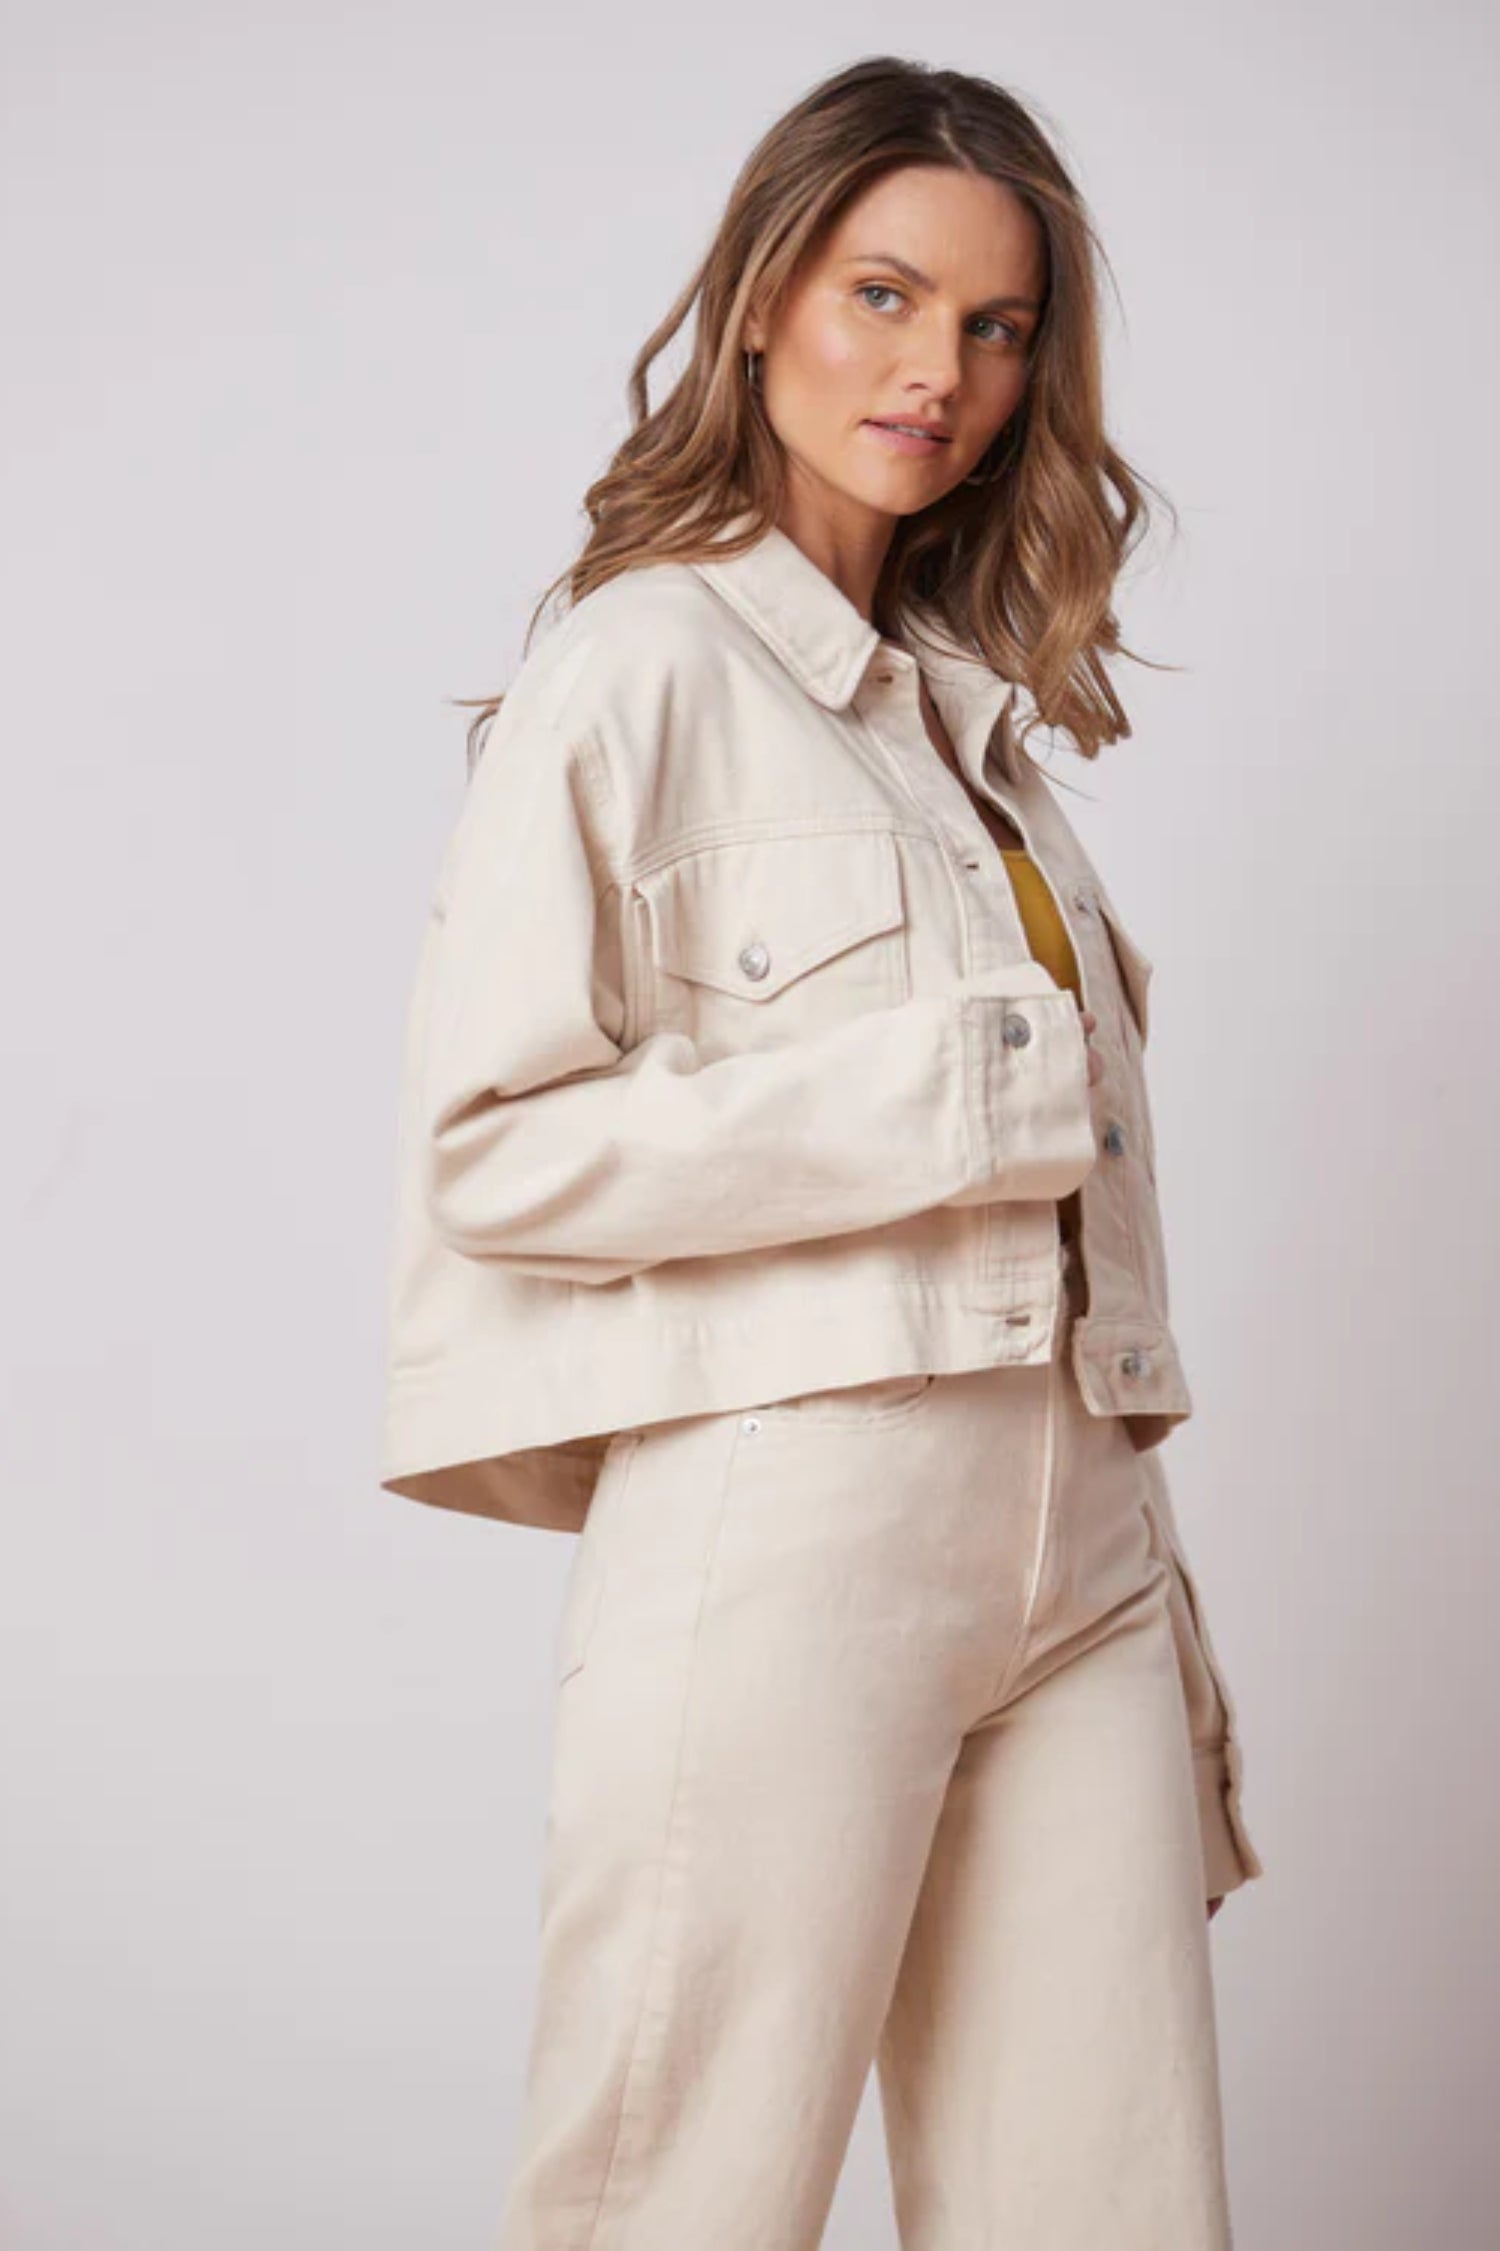 Oversized Off-White Denim Jacket by Yoga Jeans, oversized, cropped fit, button front, front pockets with buttons, 100% cotton, sizes XS to XL, made in Canada